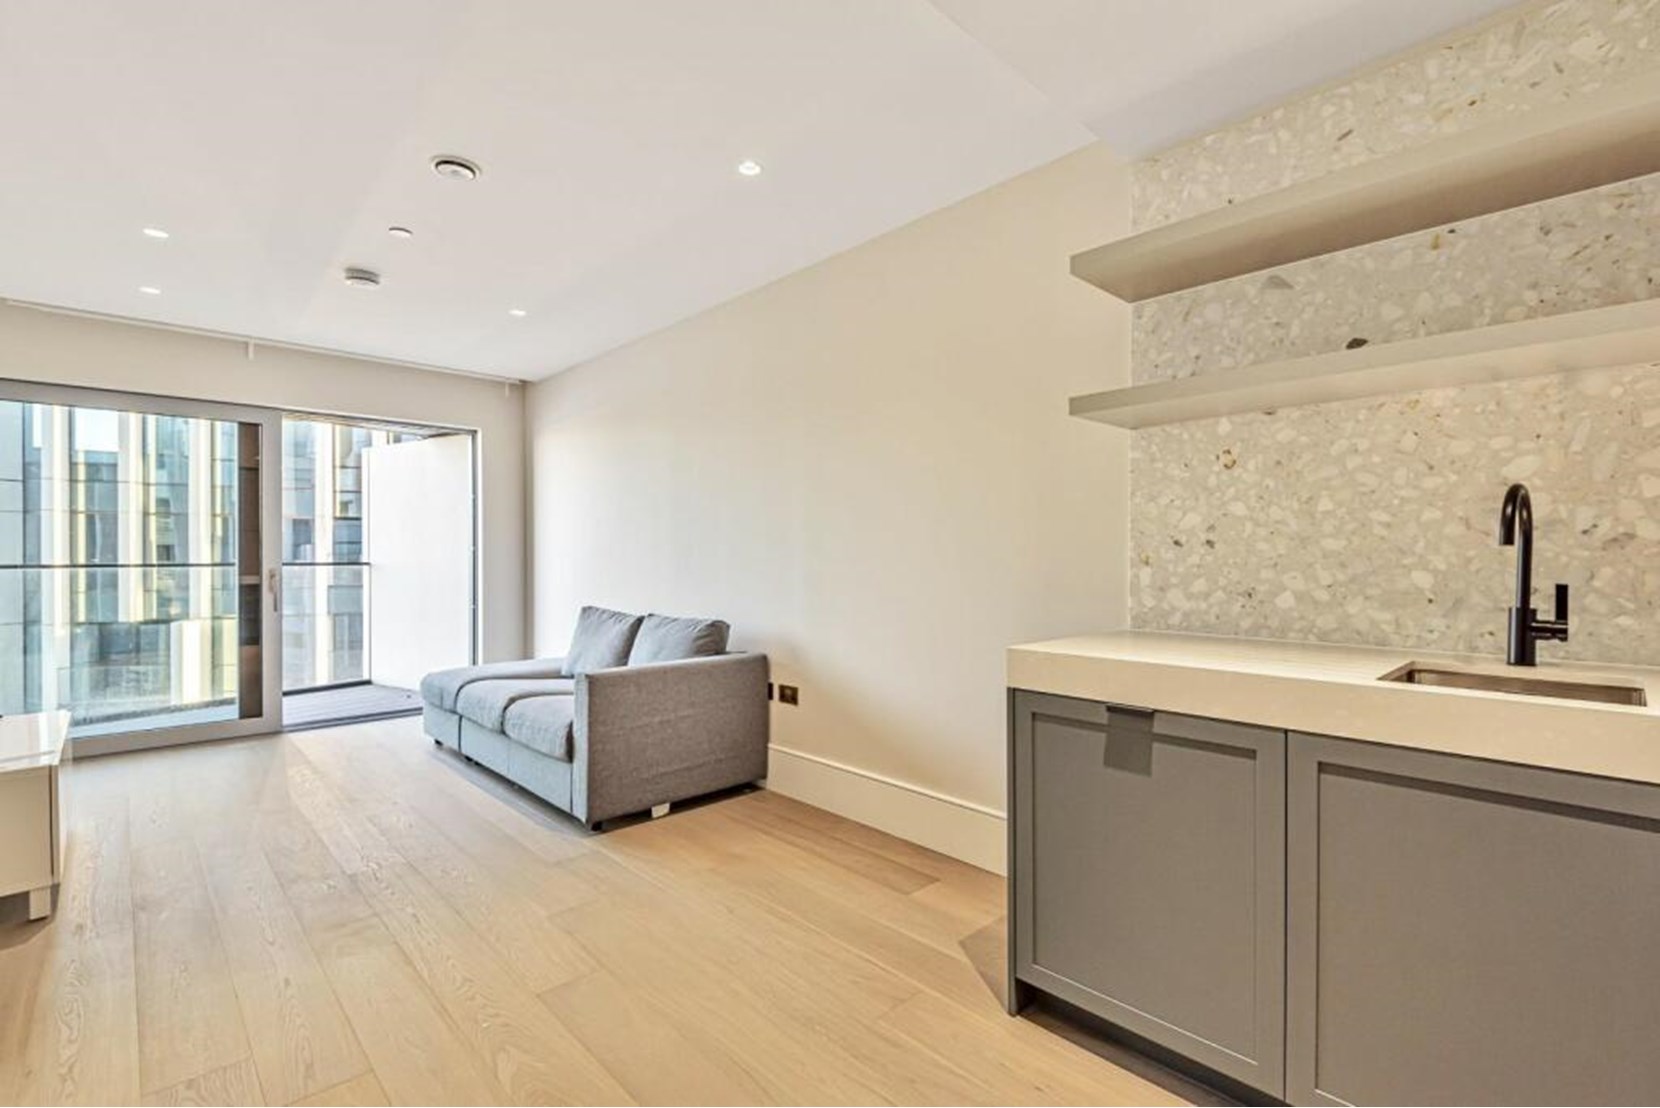 Apartments to Rent by Greenwich Peninsula at Upper Riverside, Greenwich, SE10, living kitchen area